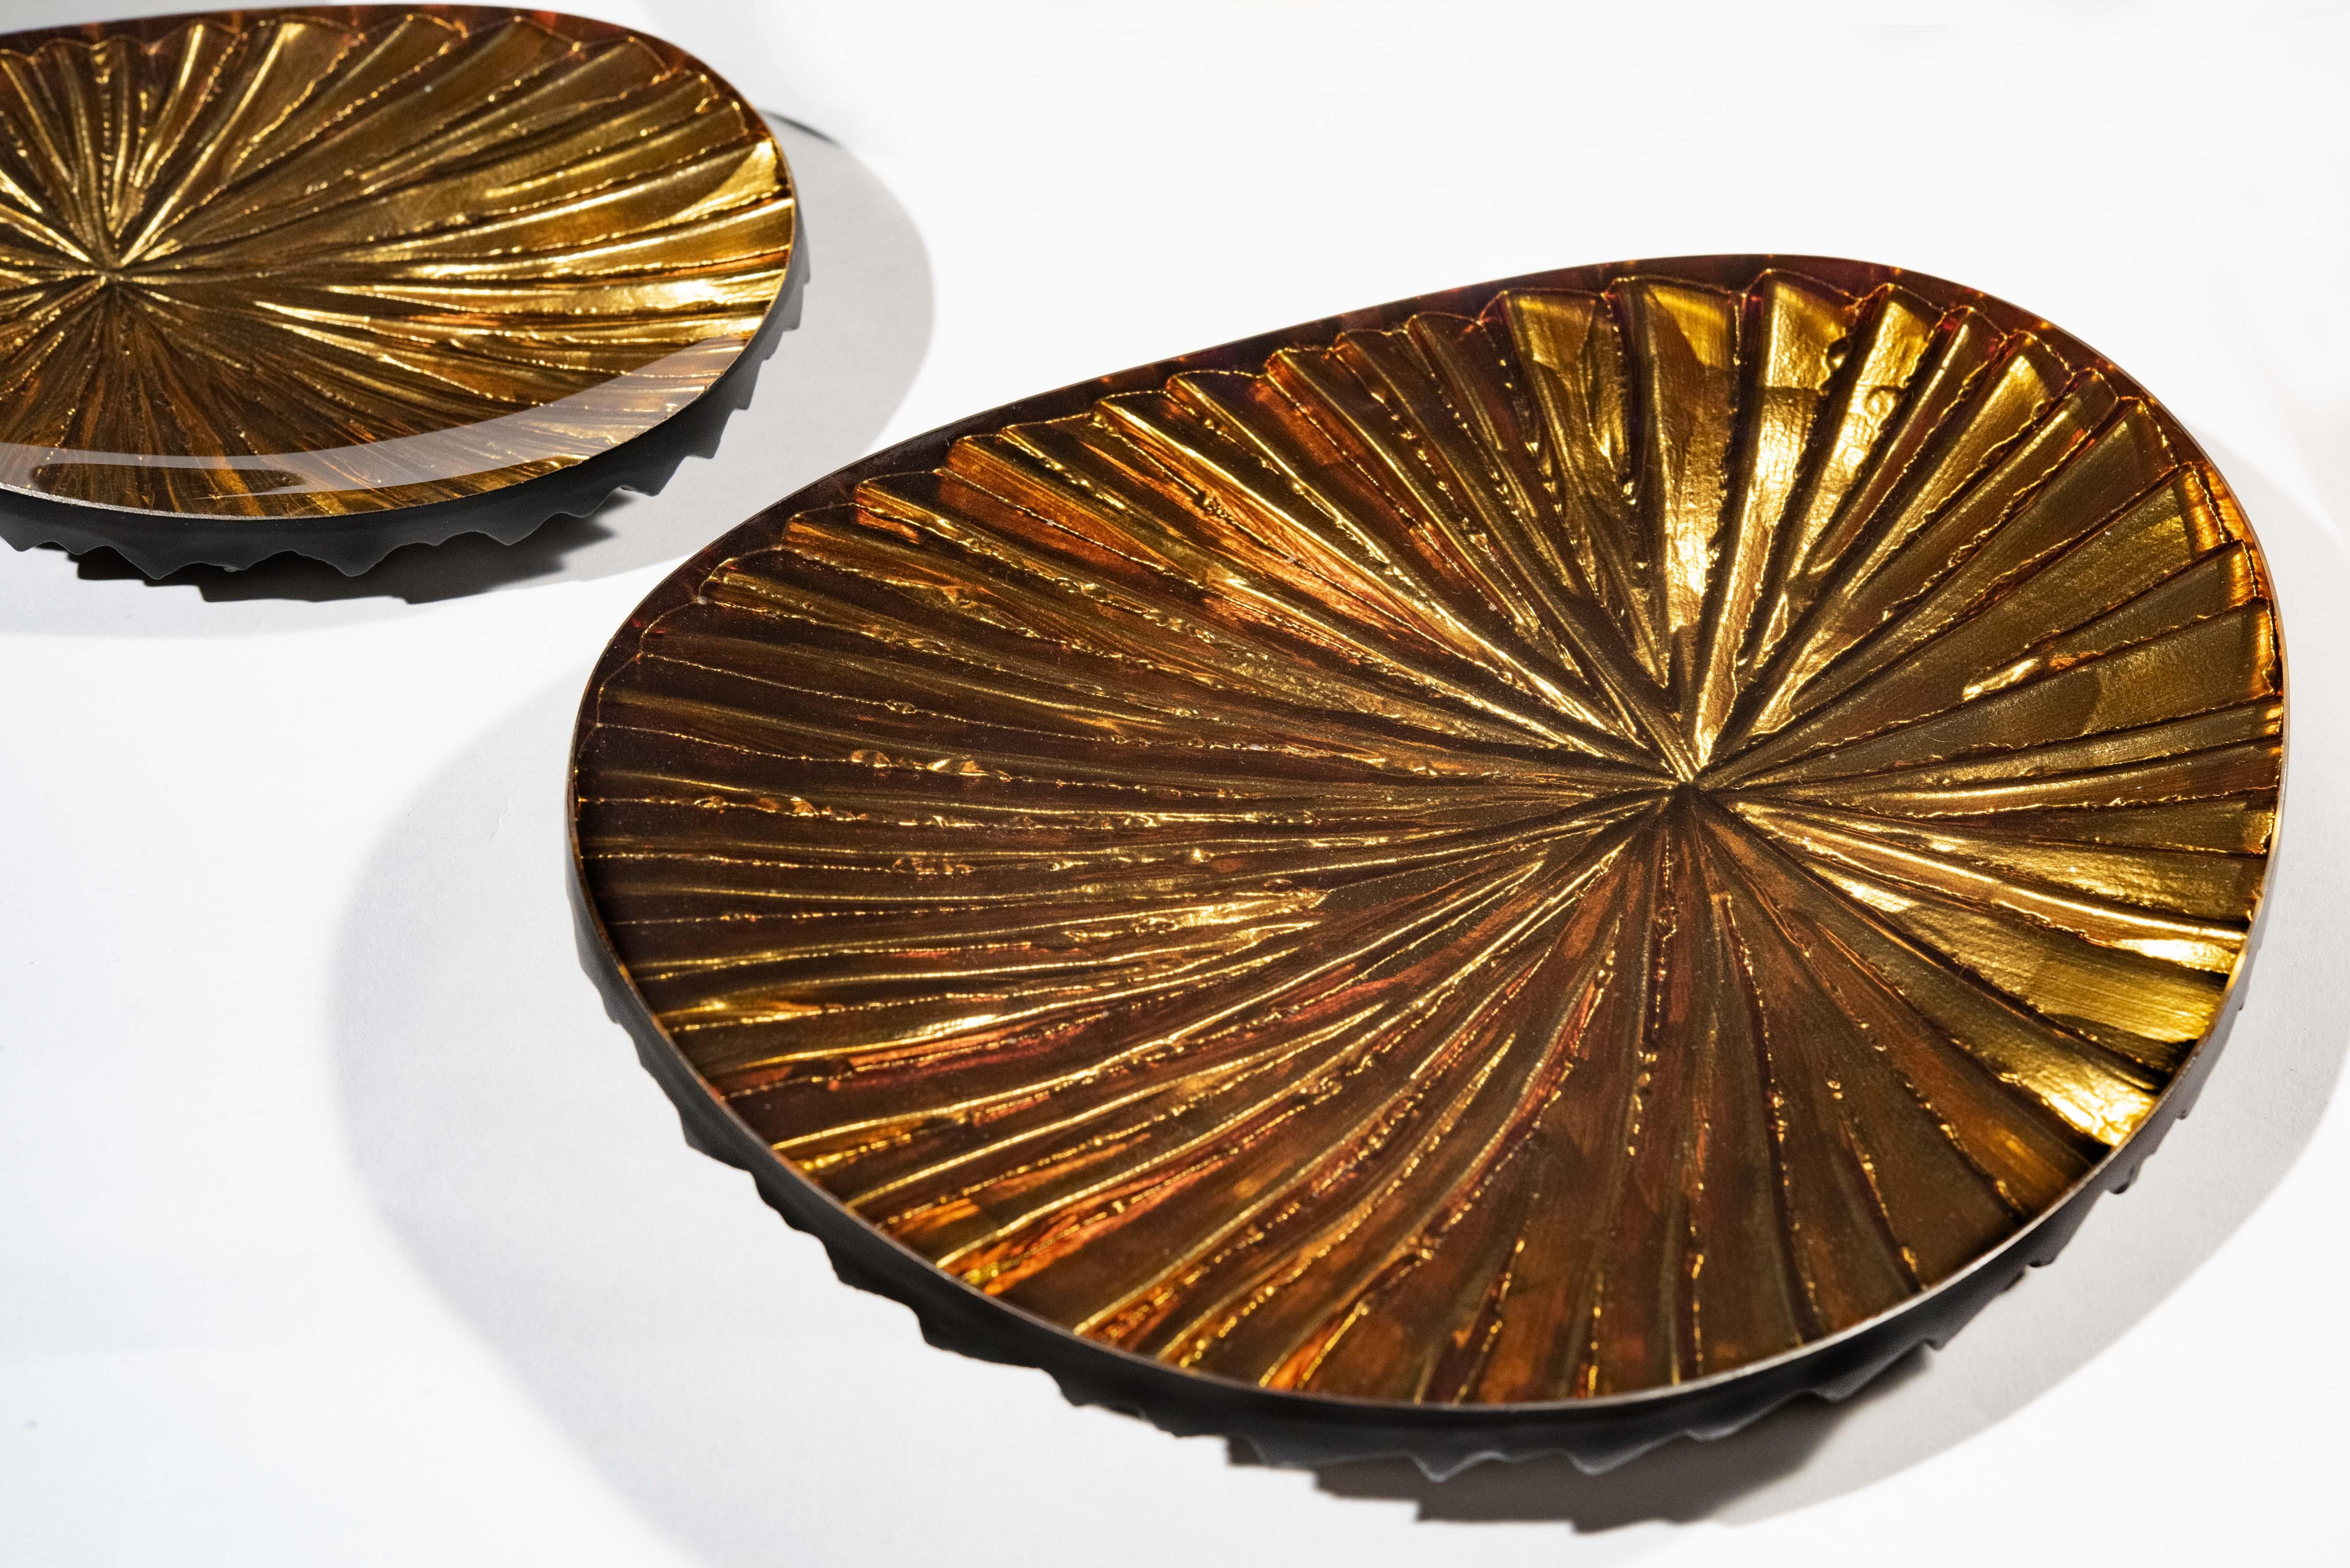 Modern Contemporary 'Oasi' Set of Six Crystal Bowls Amber and Gold by Ghirò Studio For Sale